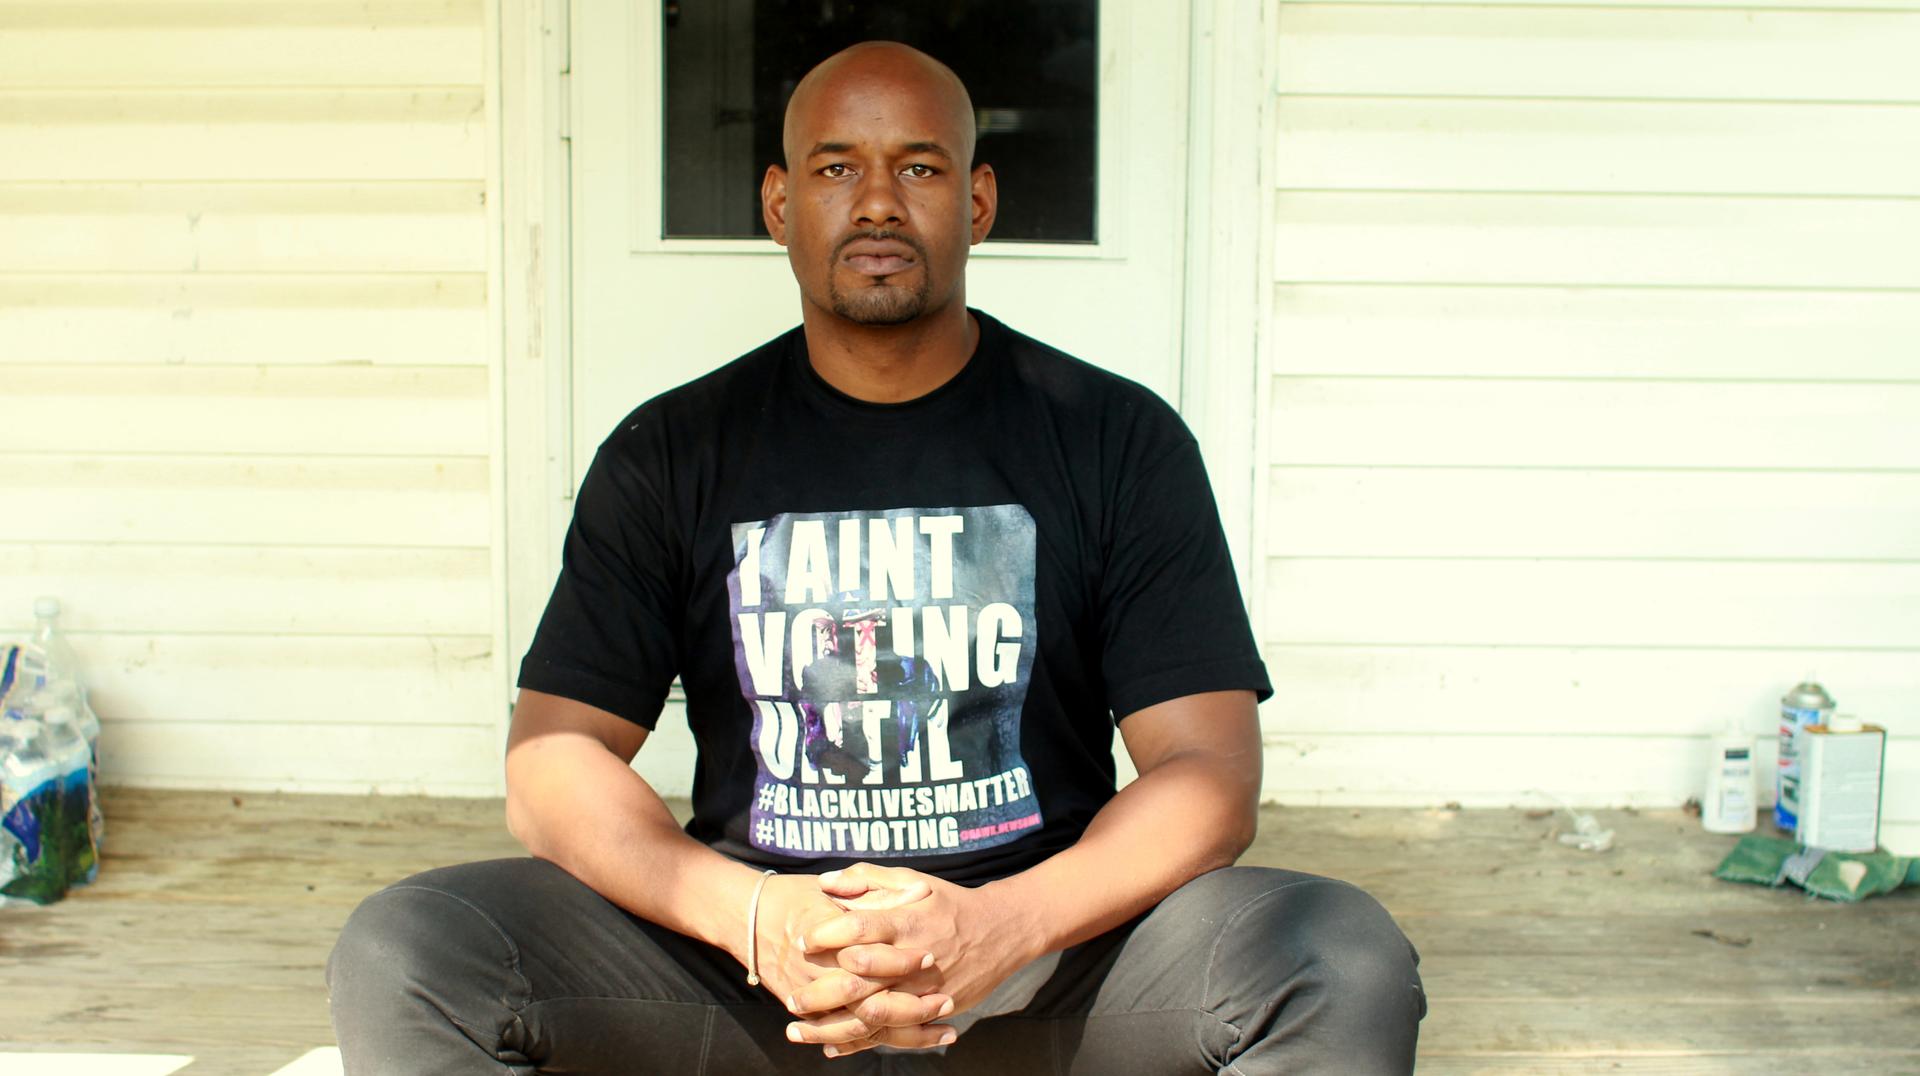 Black Lives Matter activist Hawk Newsome is calling for people to abstain from voting until the major parties listen to African American concerns. 